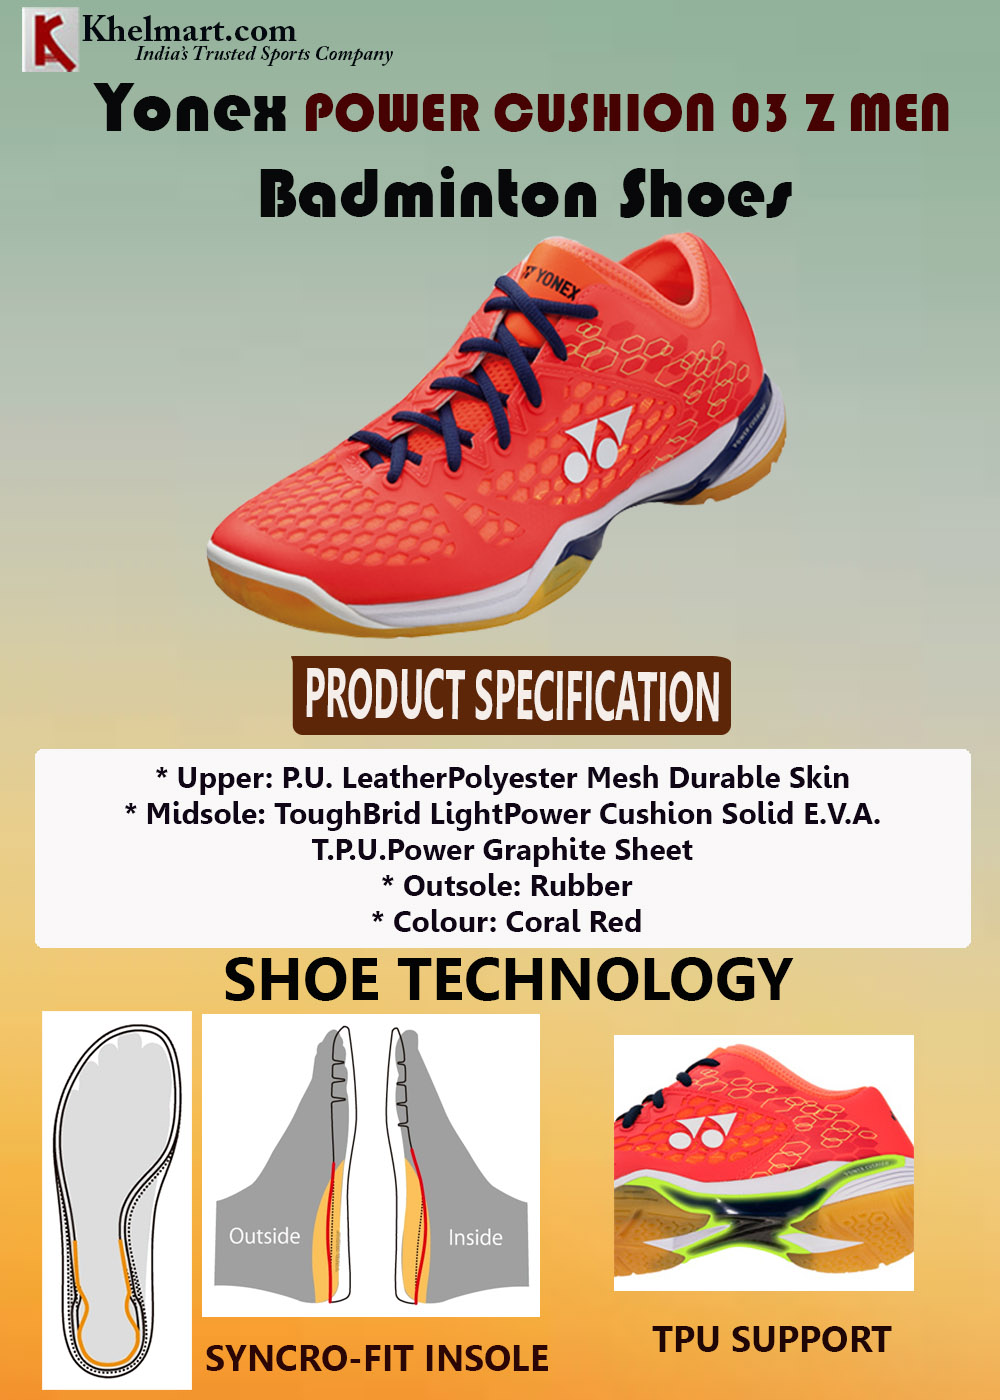 Best Badminton shoes for Year 2018 